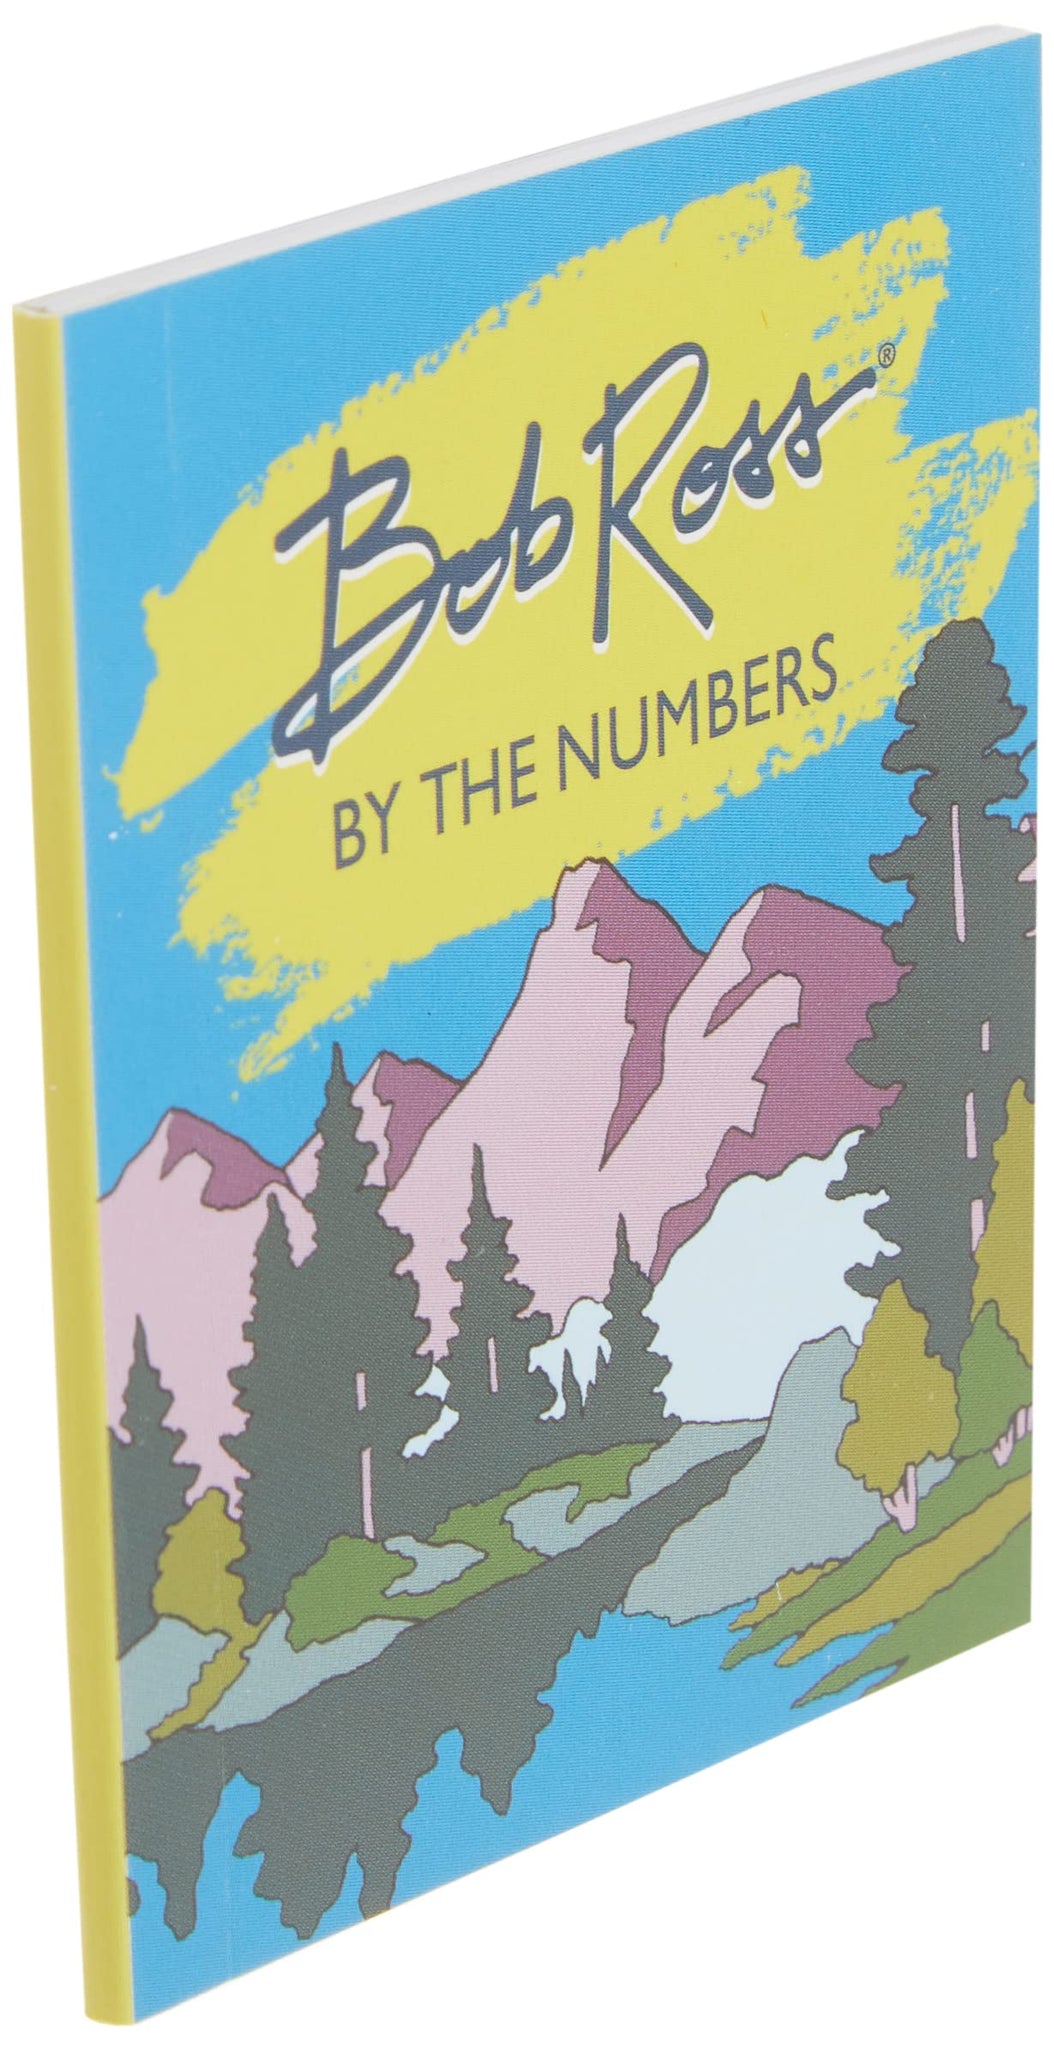 Bob Ross by the Numbers Mini Painting Set – Ali's Wagon